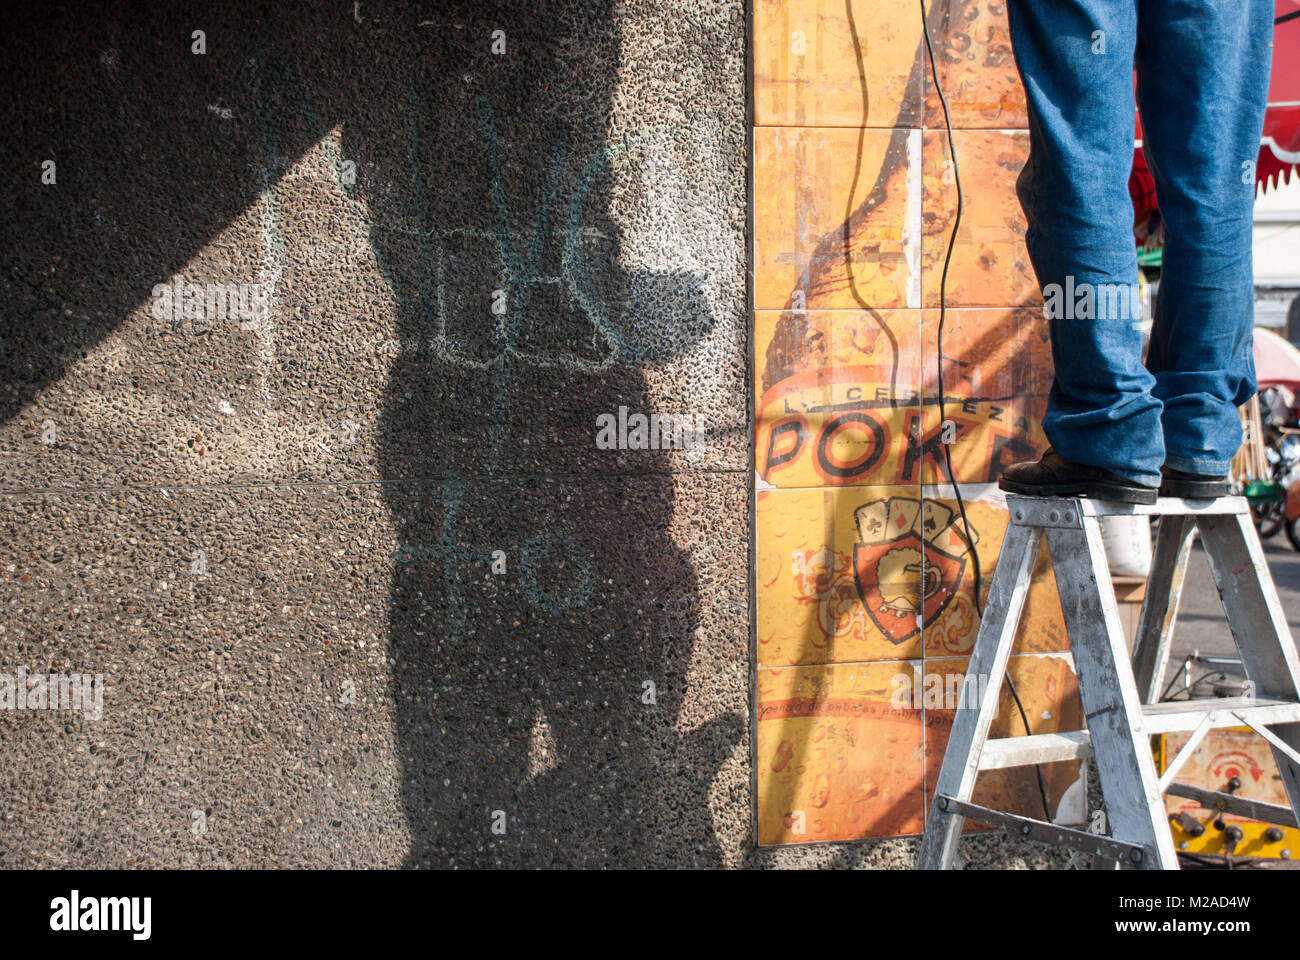 A man standing on a stepladder wearing jeans while repairing wiring Stock Photo